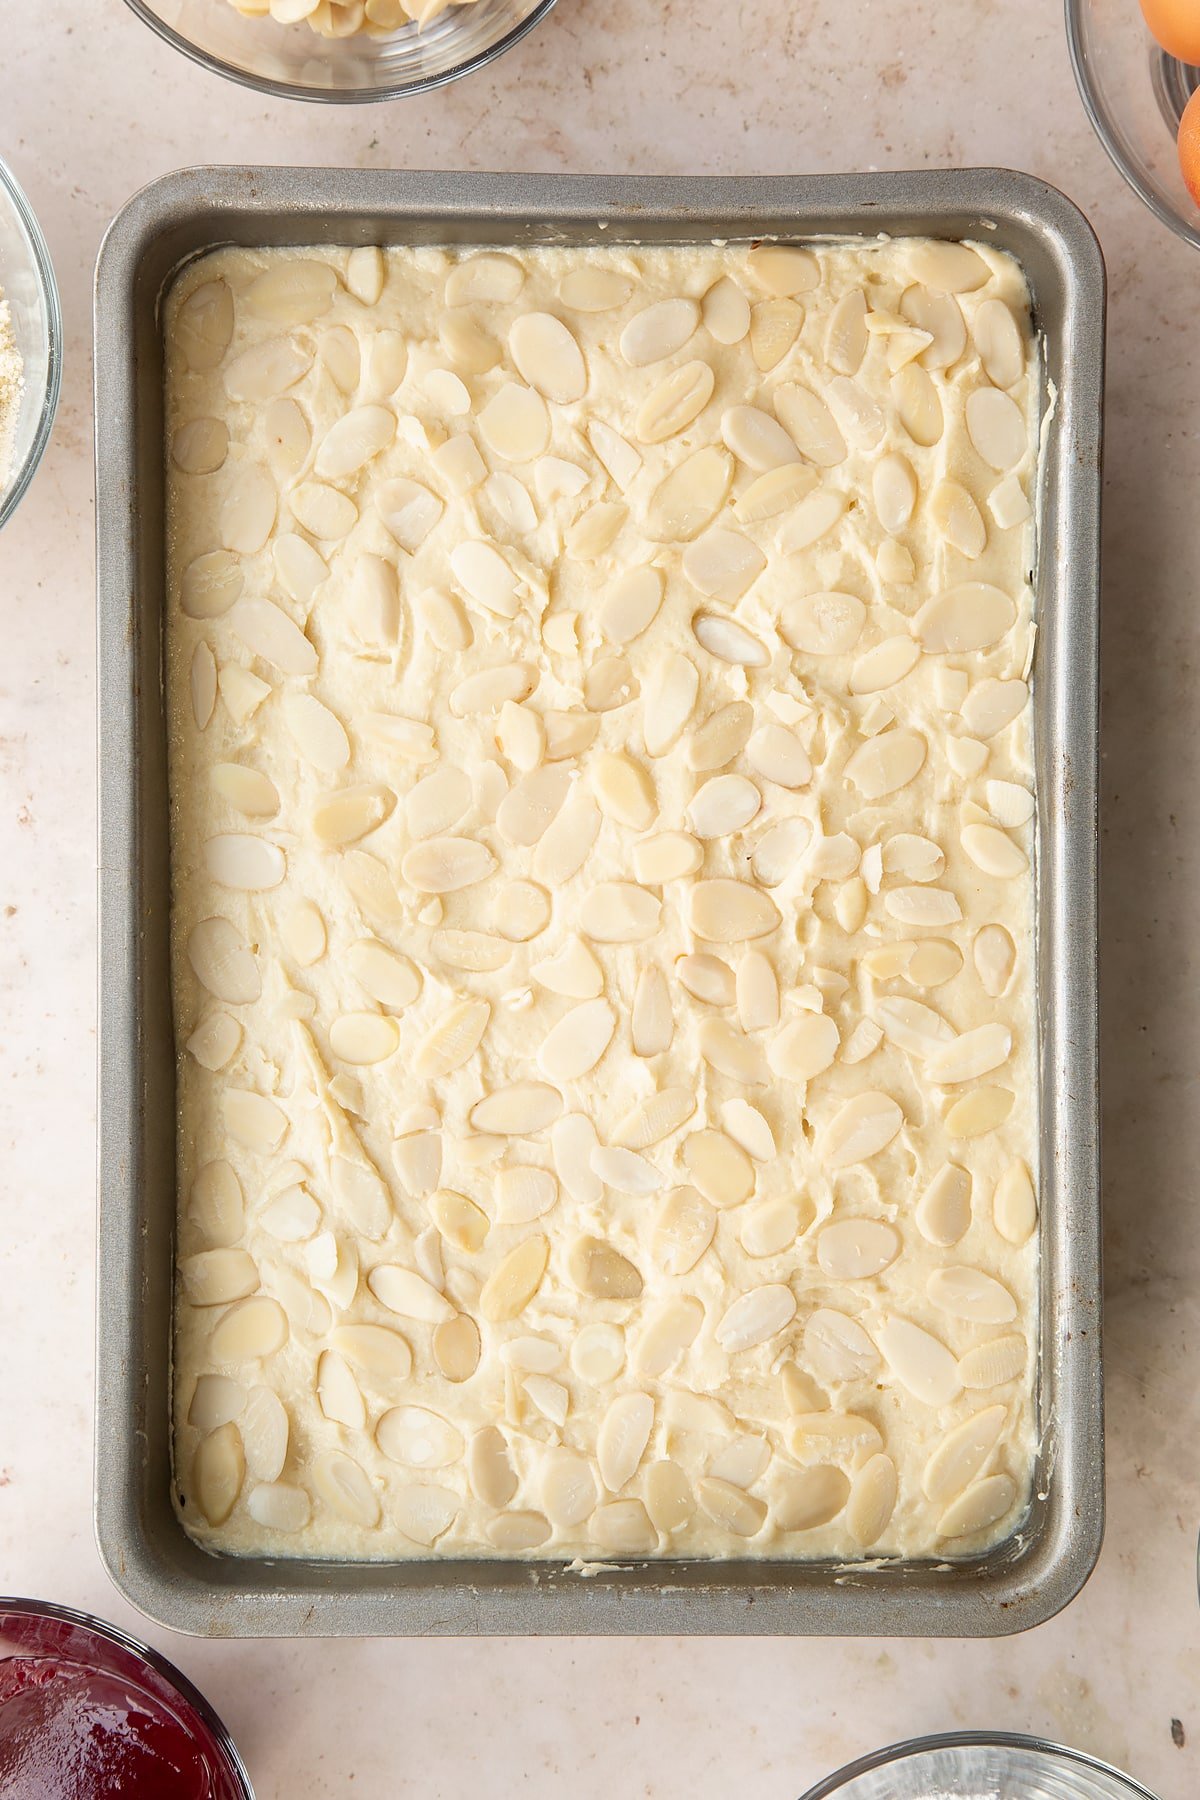 Bakewell tray bake in a tin, ready to bake, shown from above.